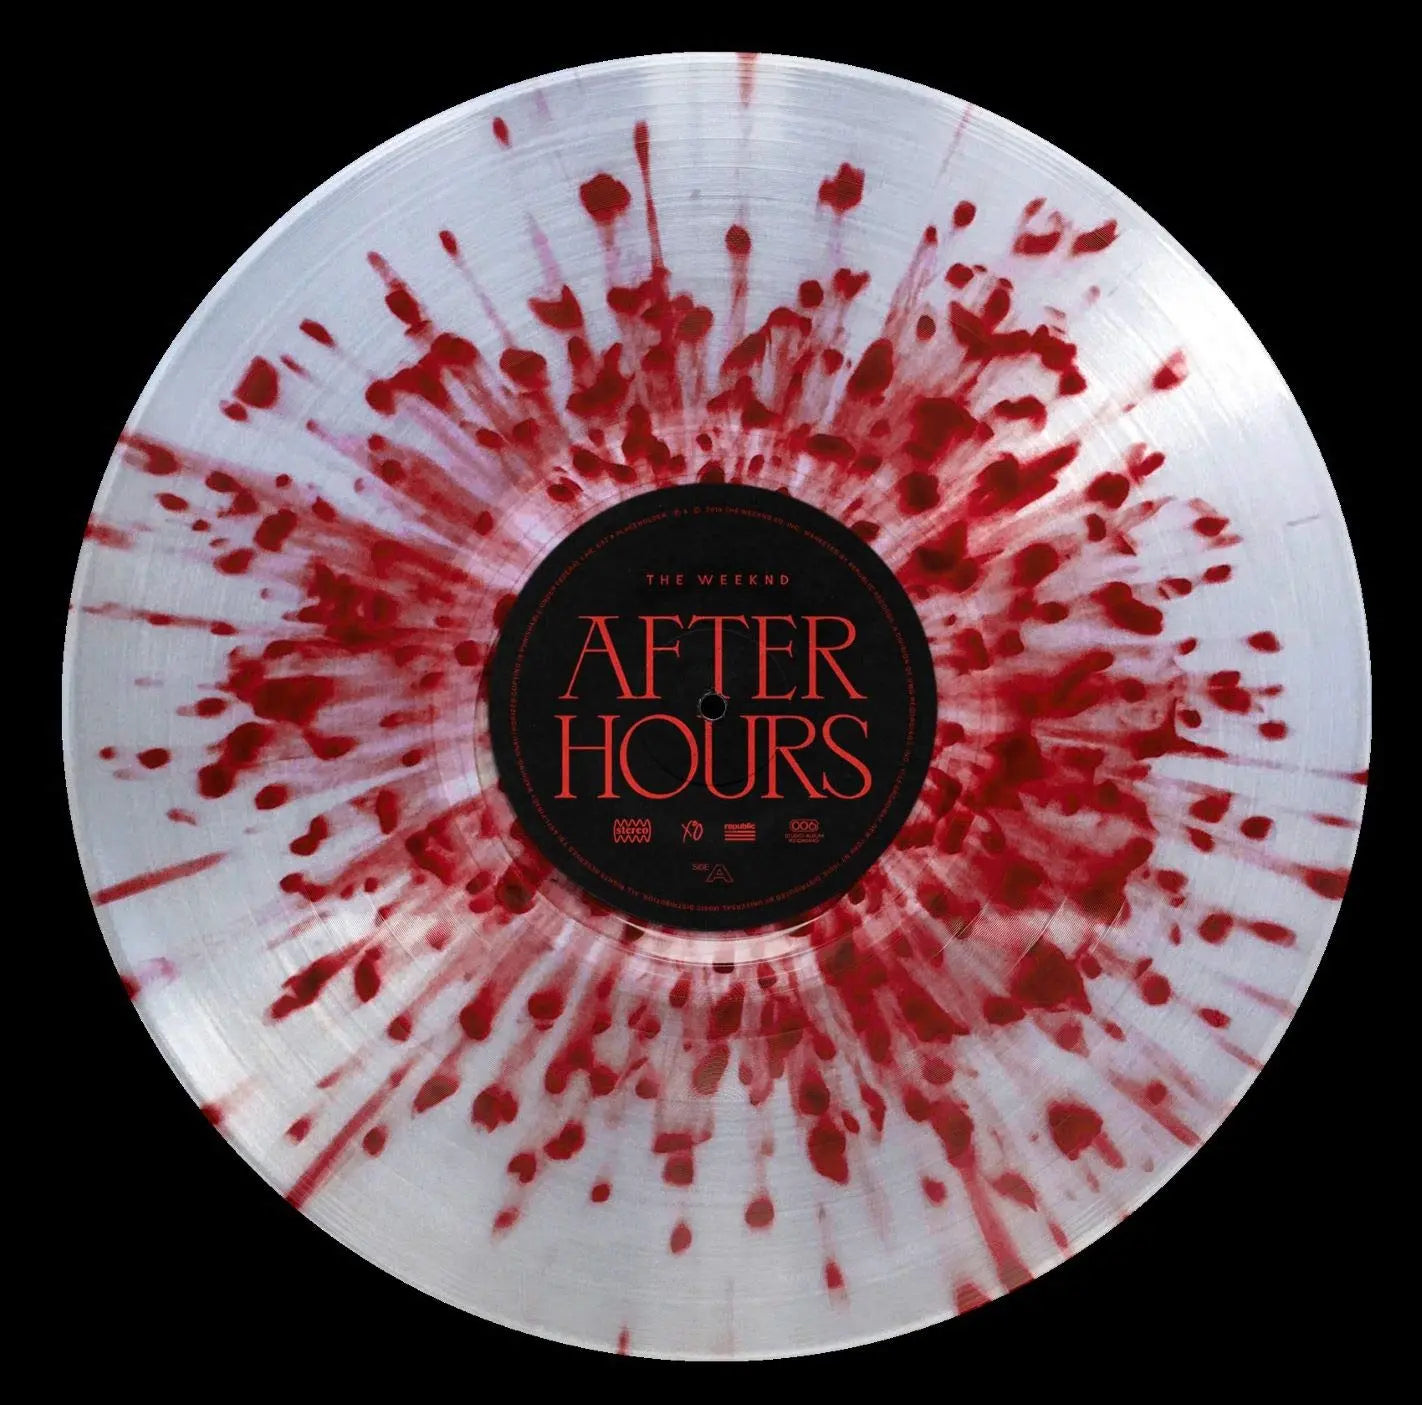 The Weeknd after hours album on clear with red splatter colored variant vinyl disc